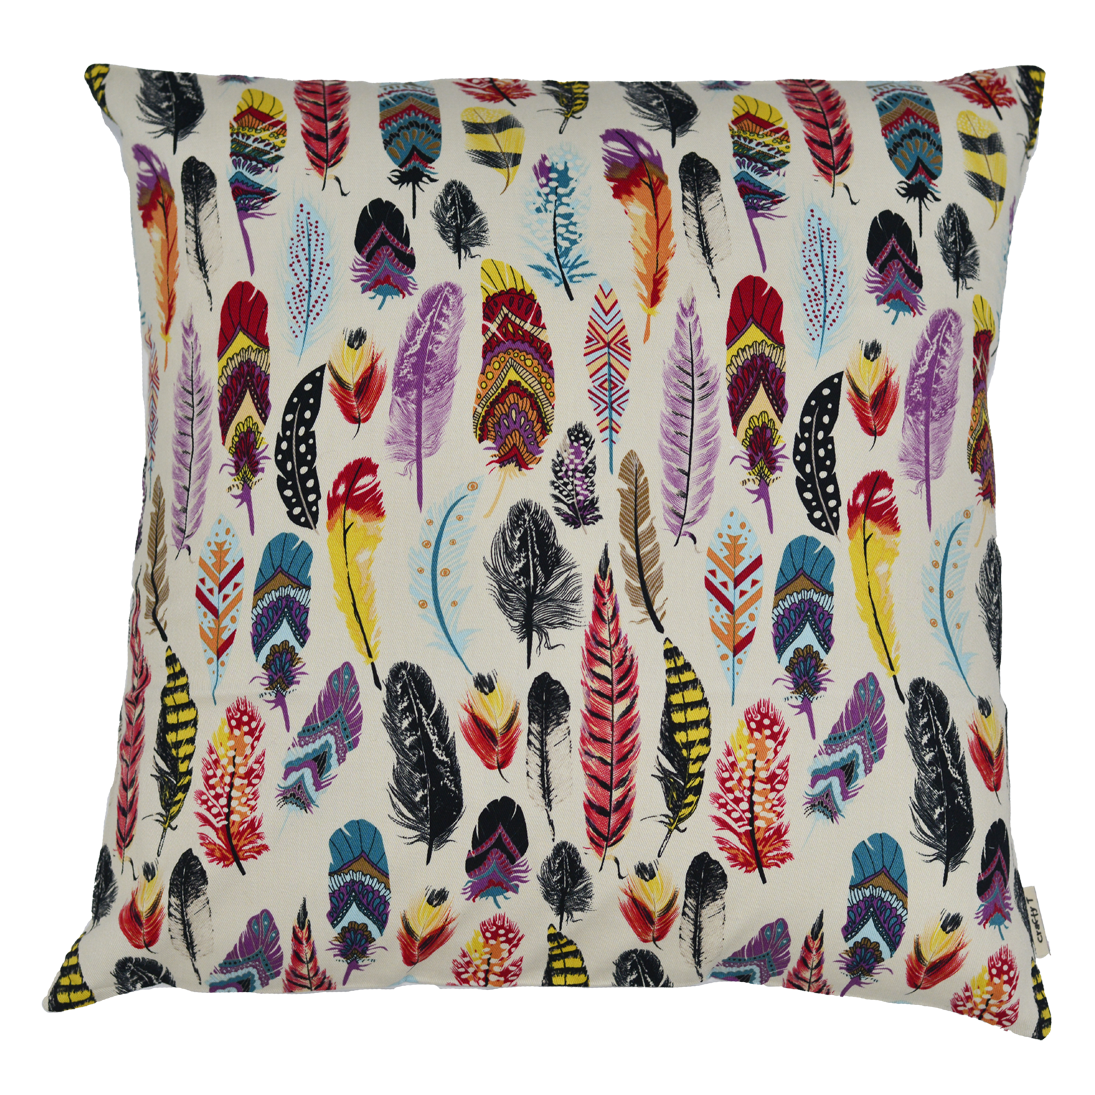 Multicolour Feathers Cushion Cover - Harlan House & Home